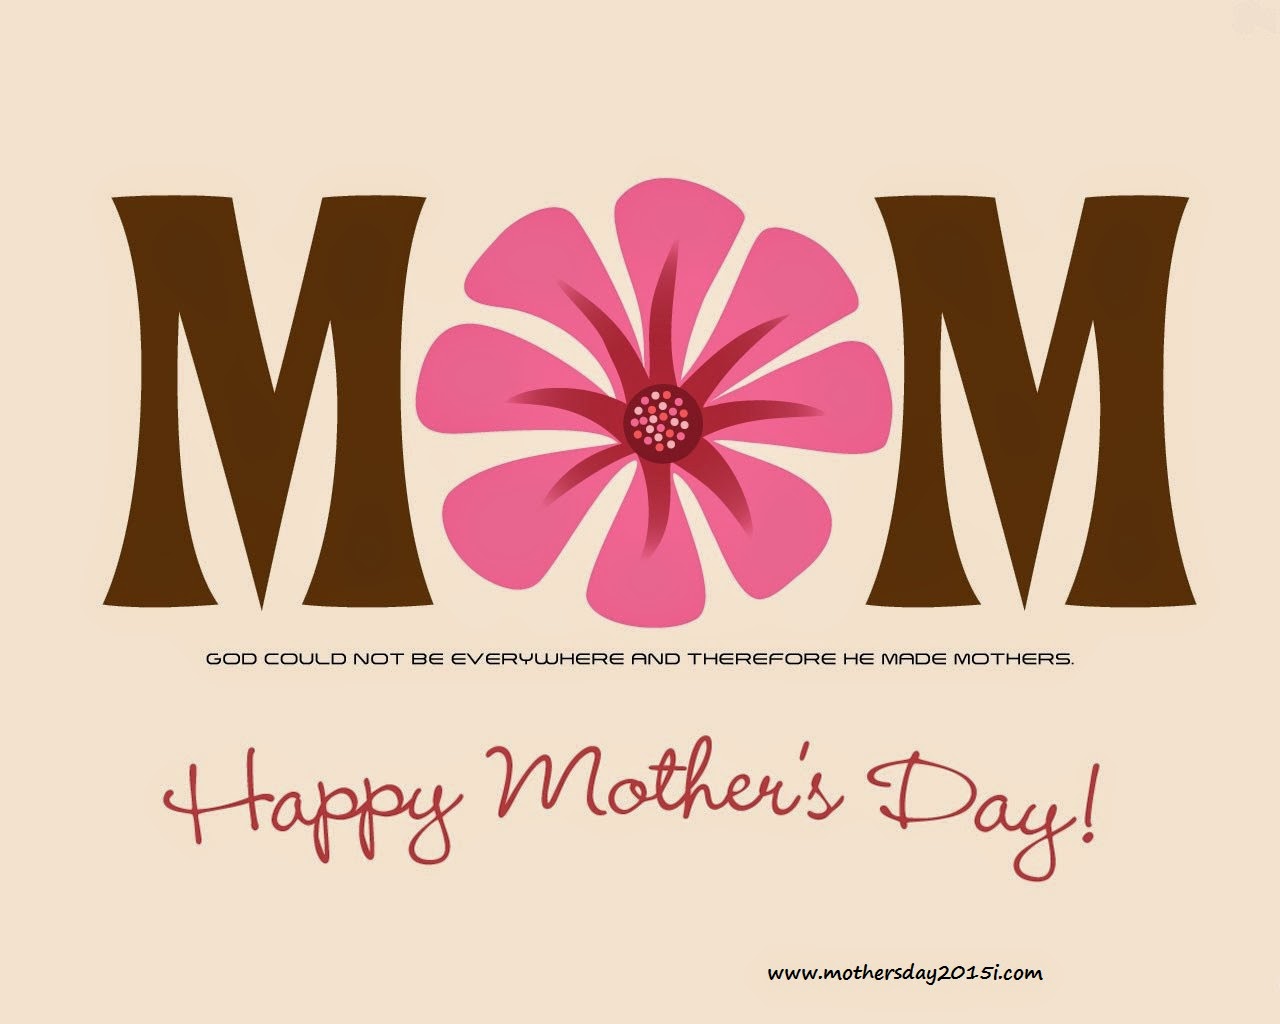 Mothers Day Pictures, Images, wallpaper and Photos | Happy Mothers.